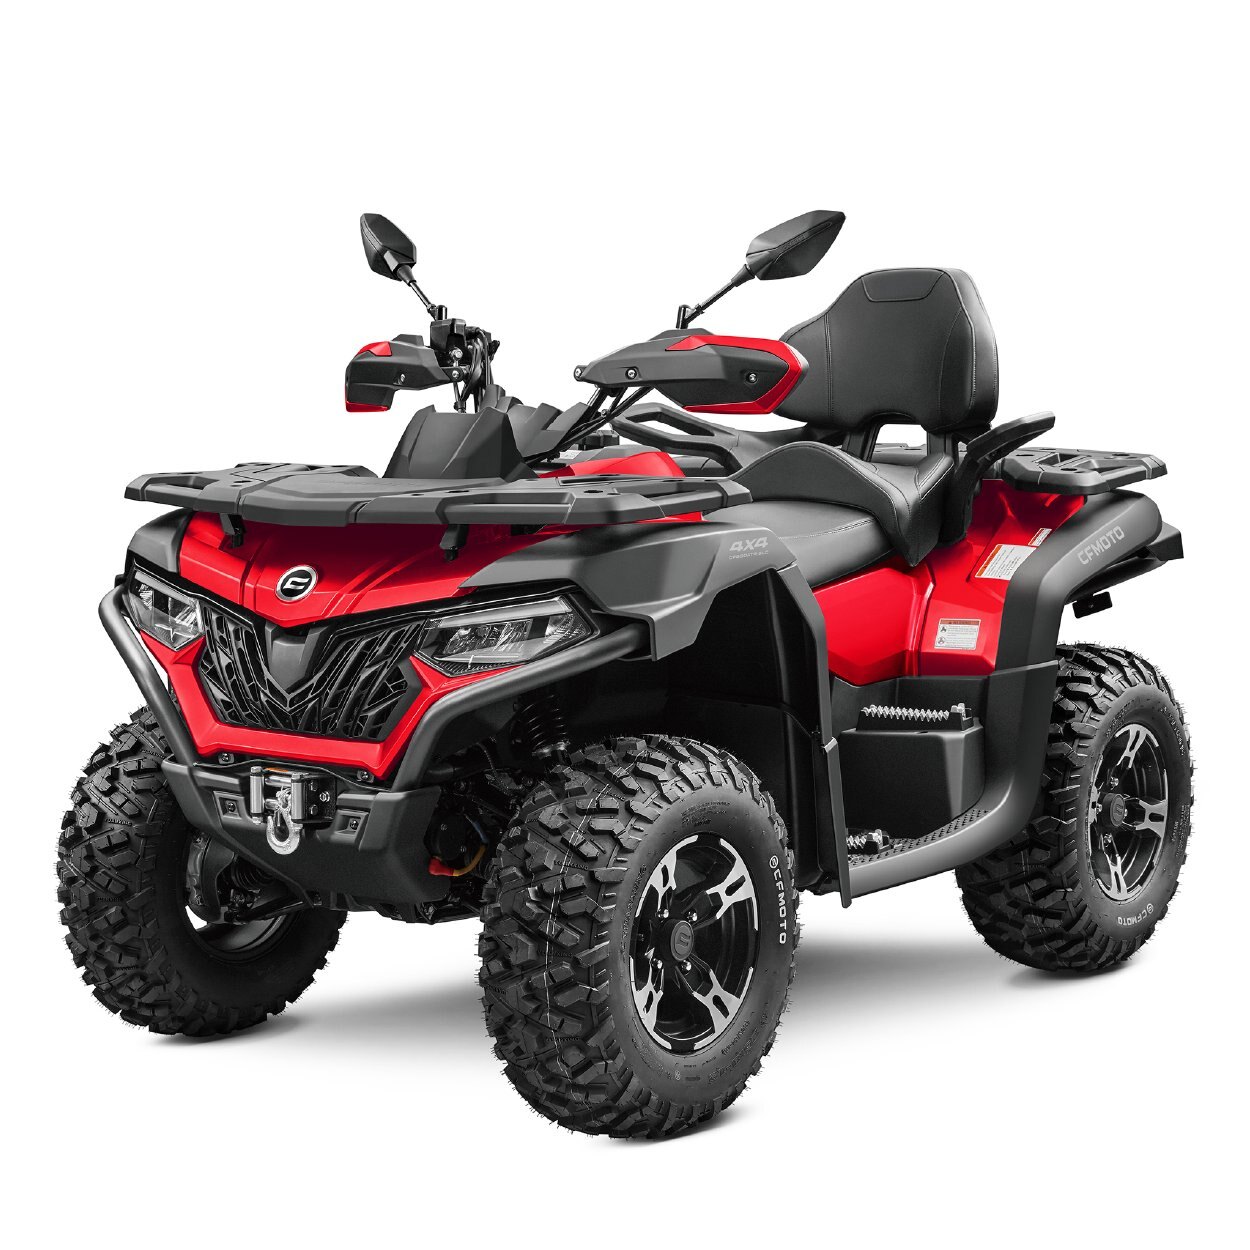 2023 CFORCE 600 TOURING Red NEW YEAR SPECIAL REBATED PRICE INCLUDES ALL SET UP $9999. PLUS HST